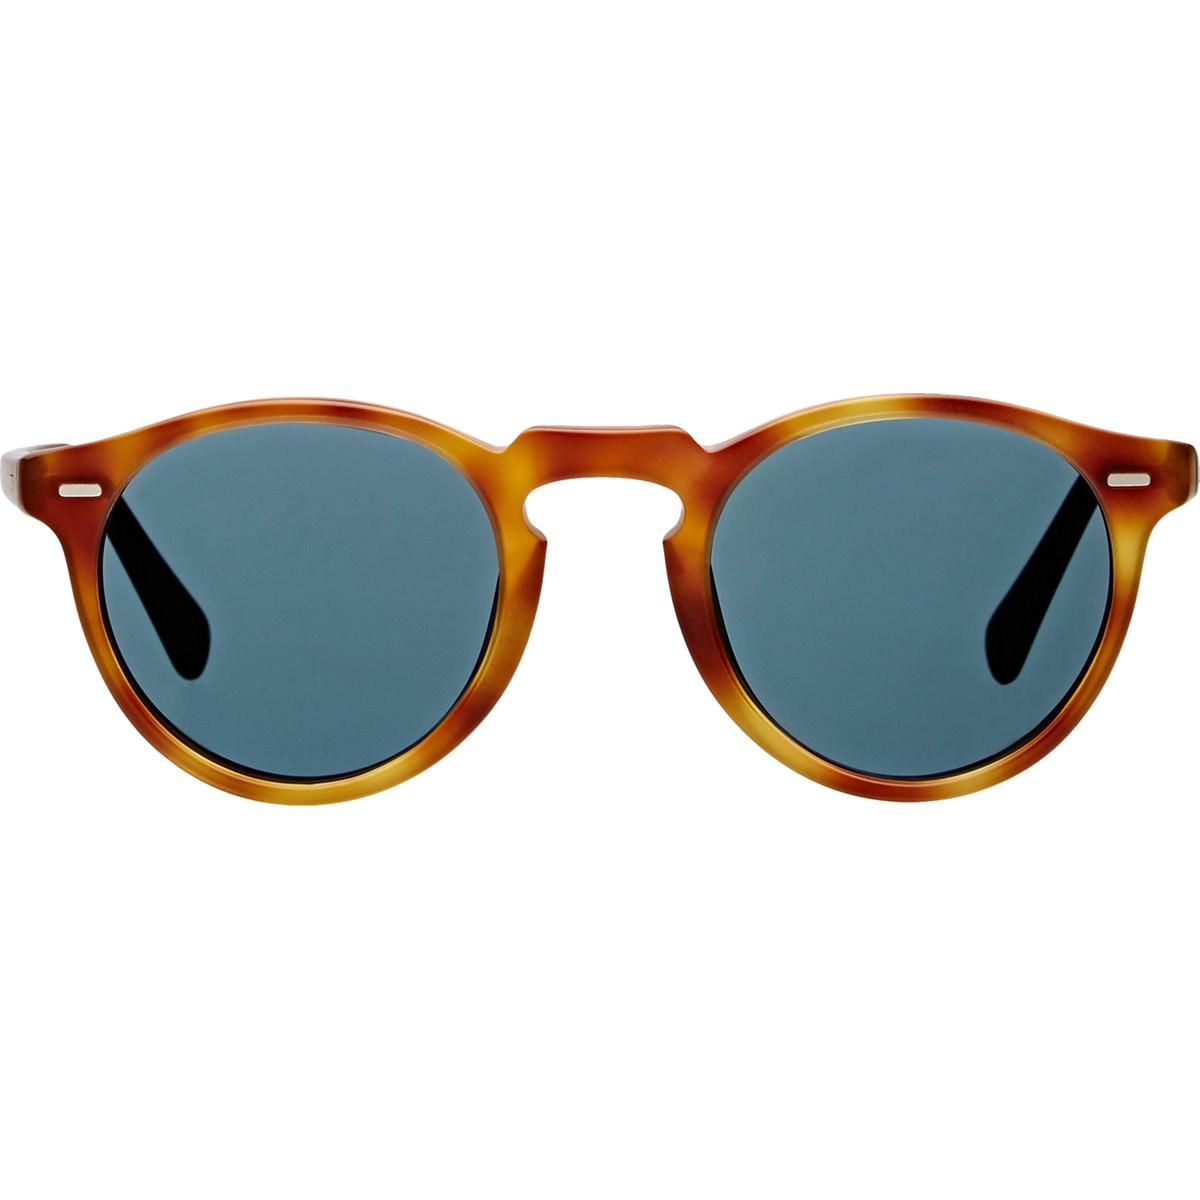 Oliver Peoples Gregory Peck 47 Sunglasses for Men - Lyst